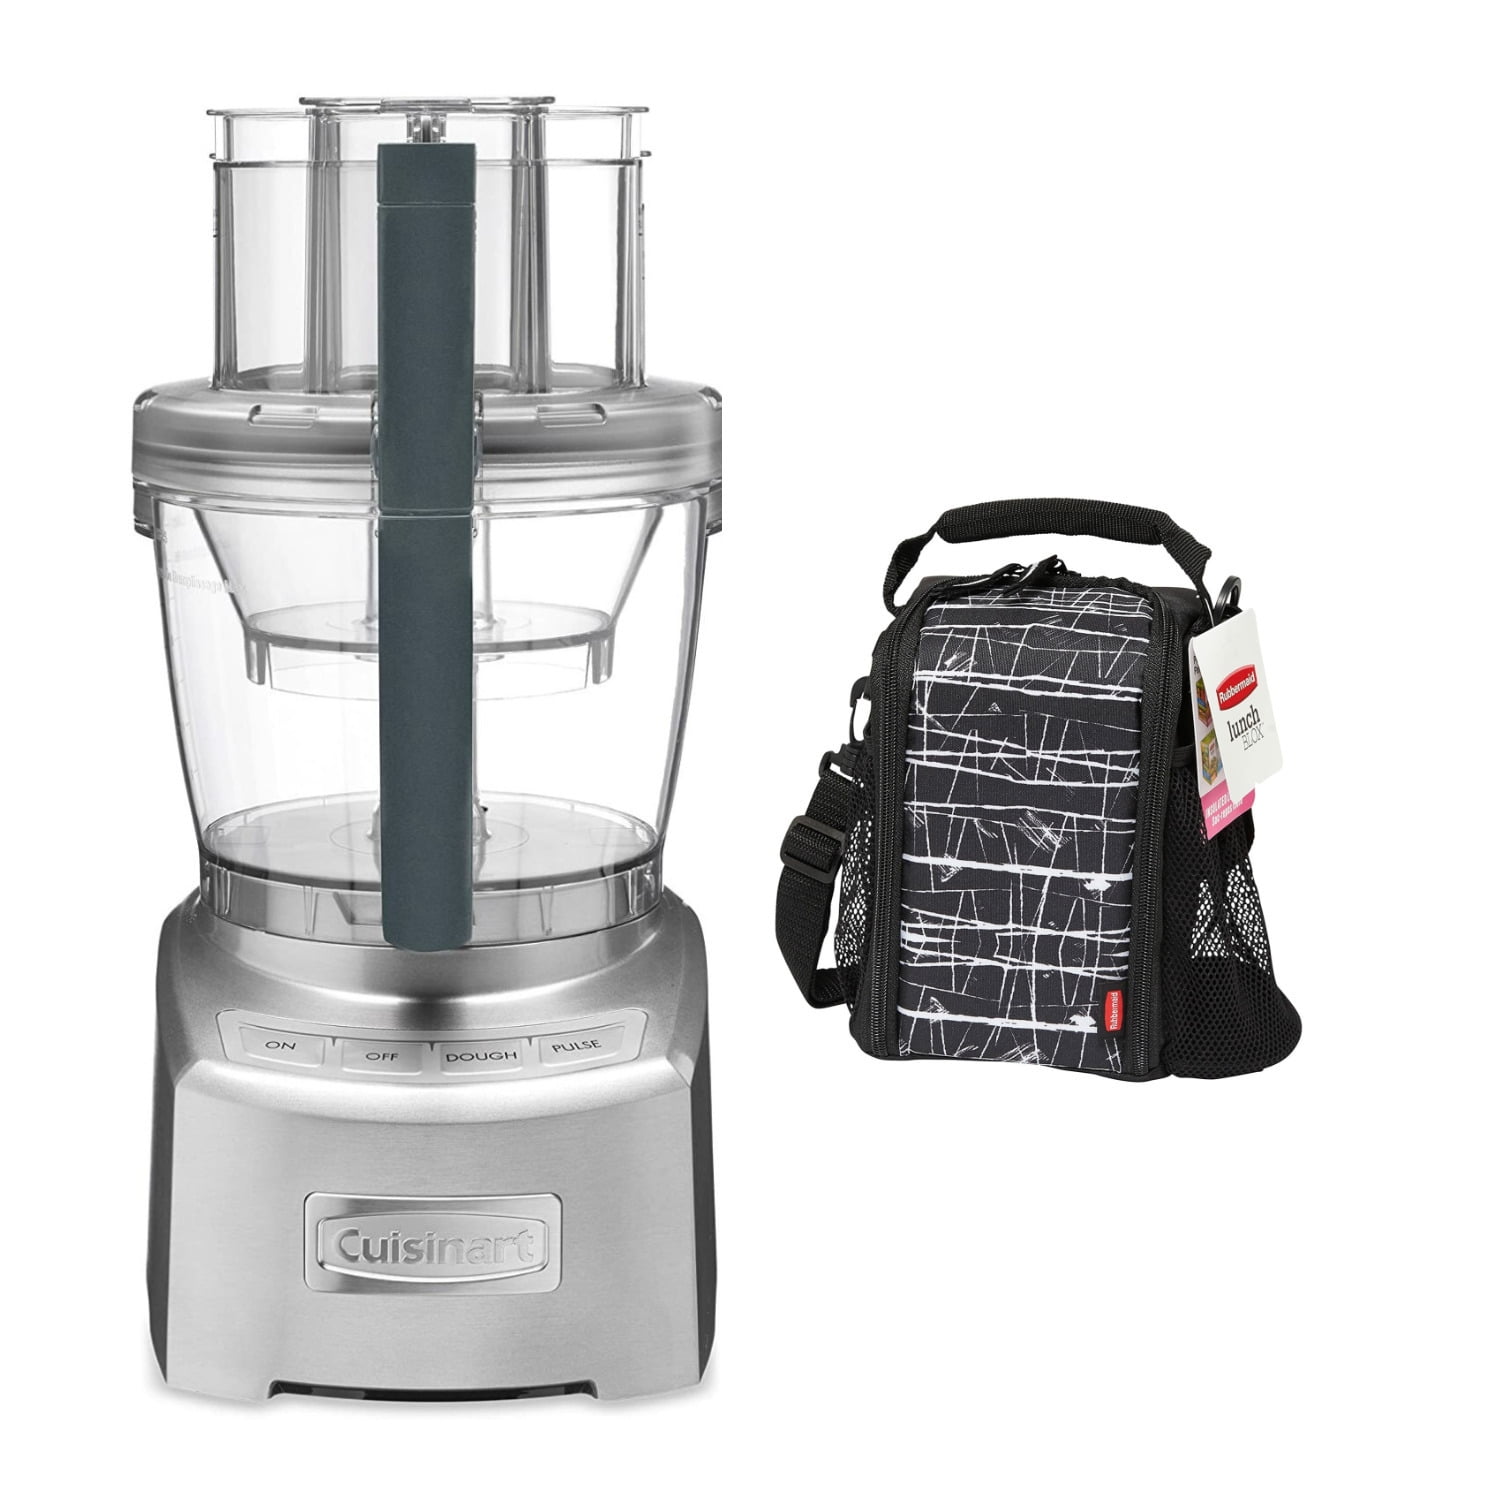 Cuisinart Elite Collection 2.0 14-cup Food Processor with Measuring Spoons  